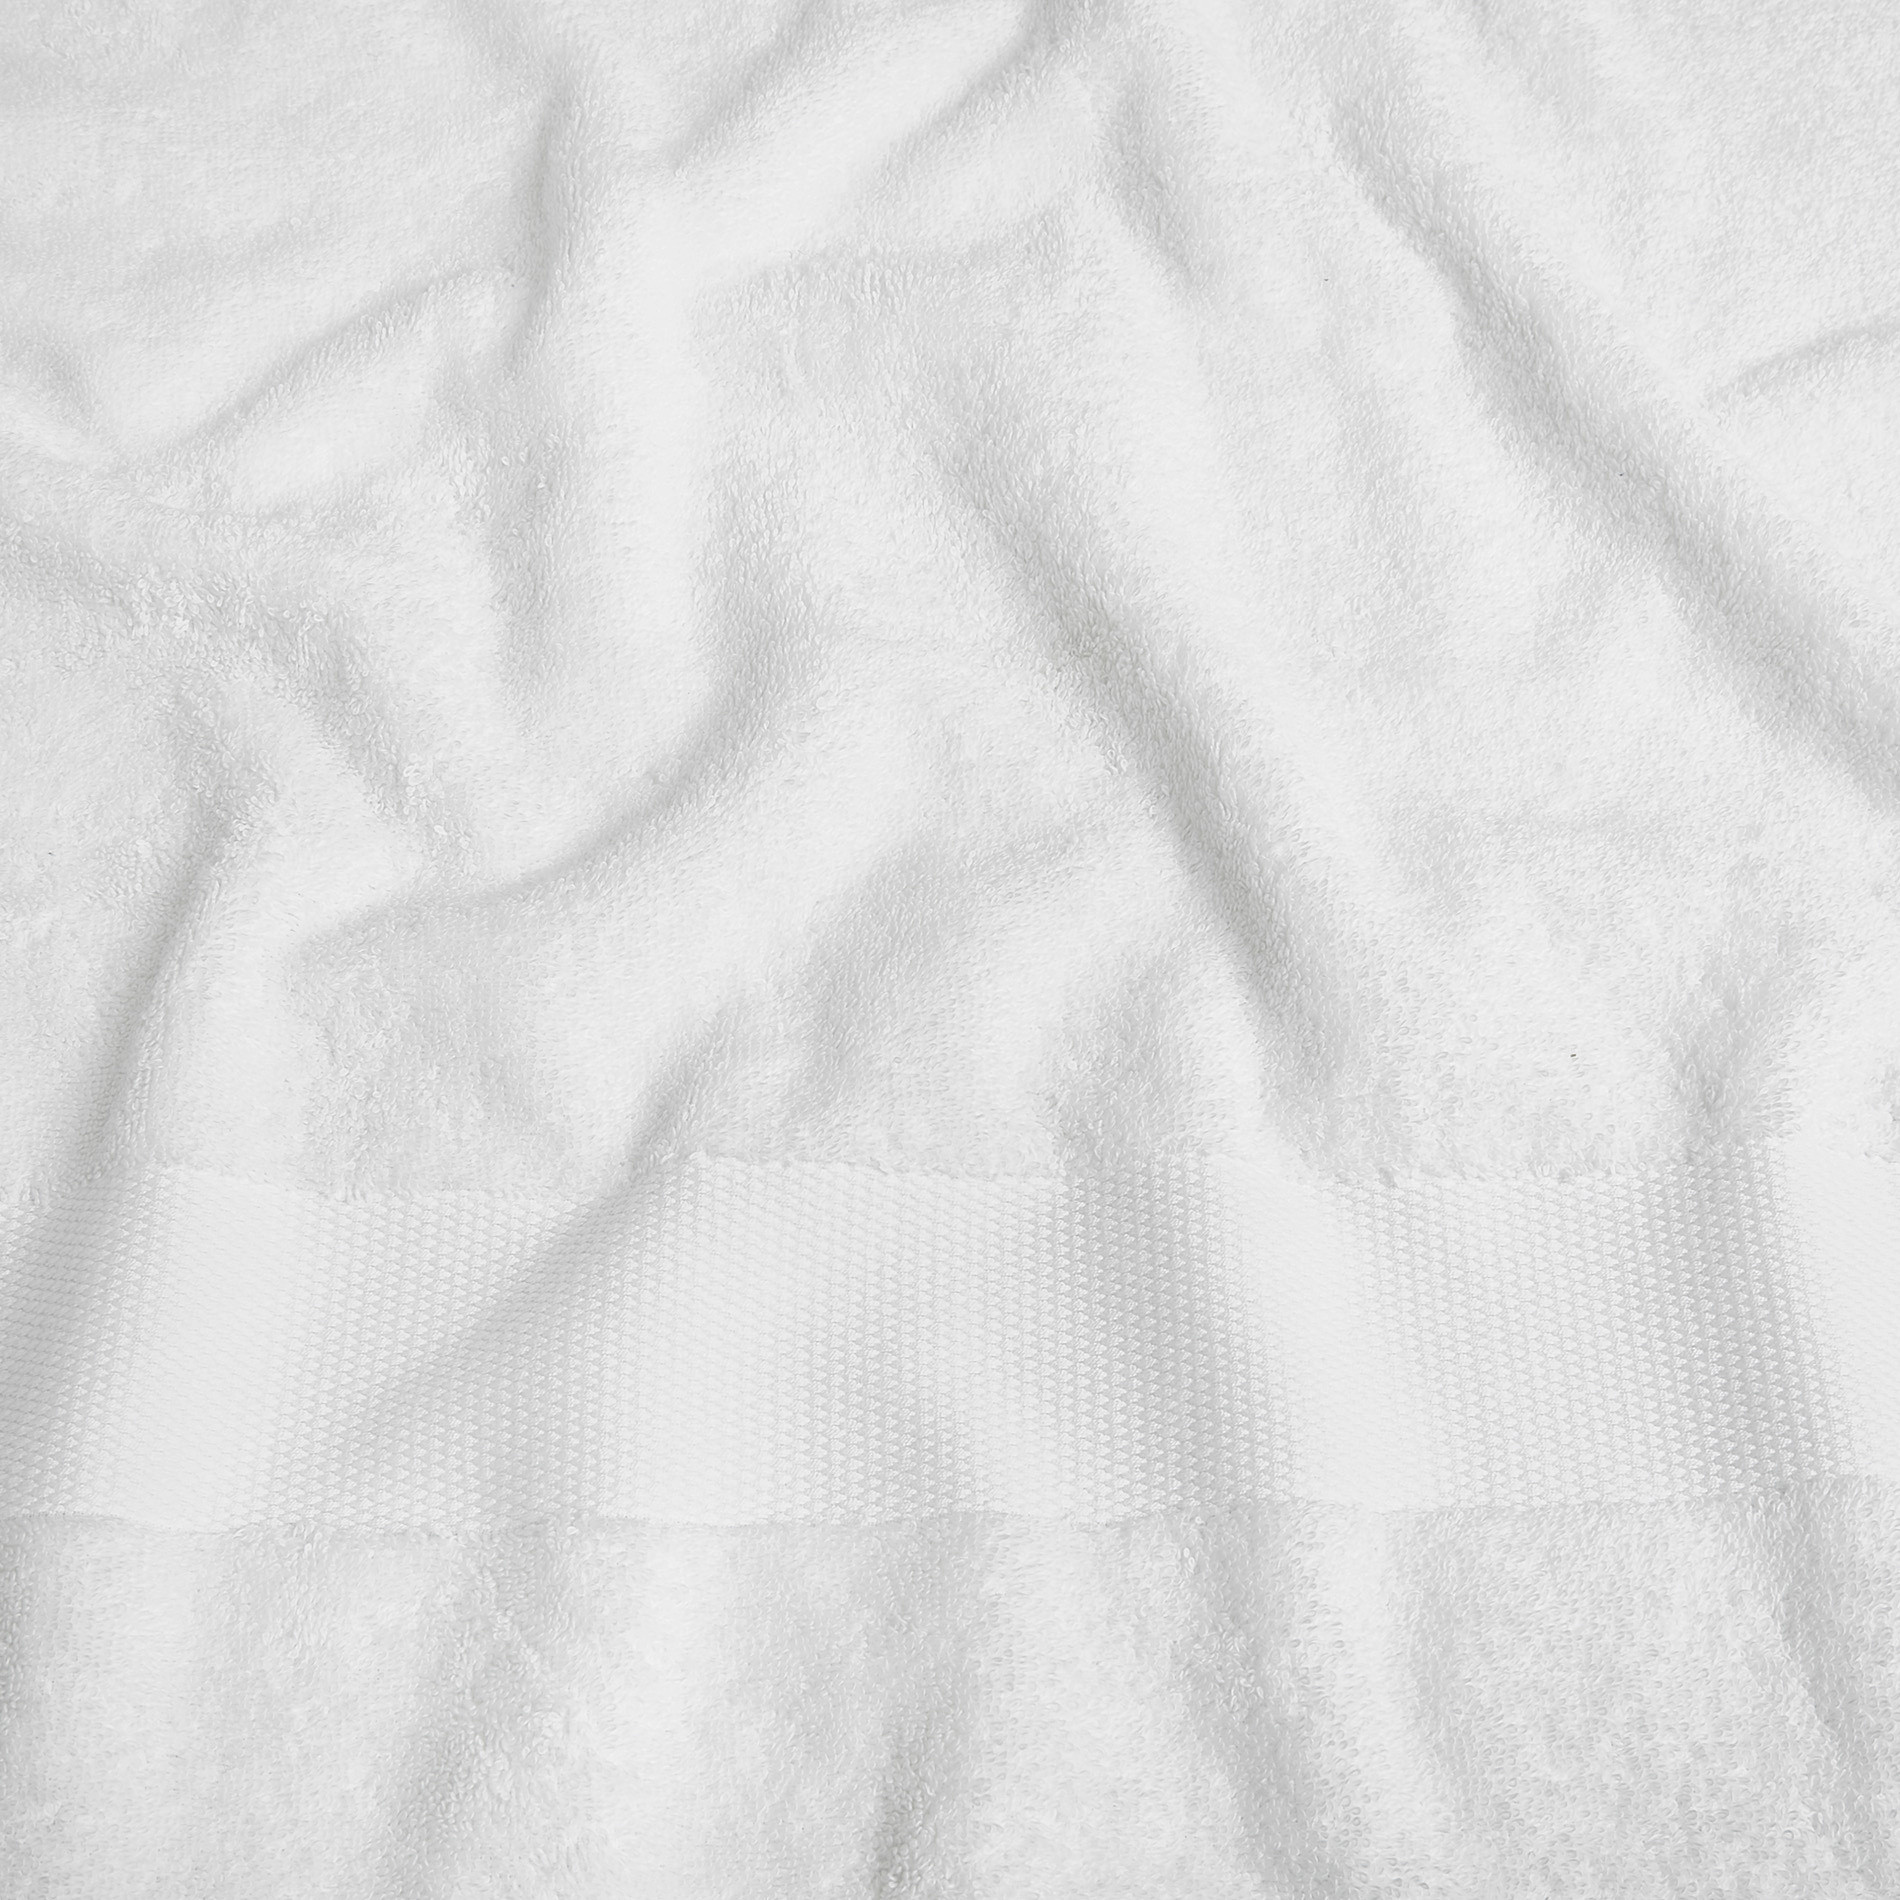 Zefiro pure cotton terry towel, White, large image number 3